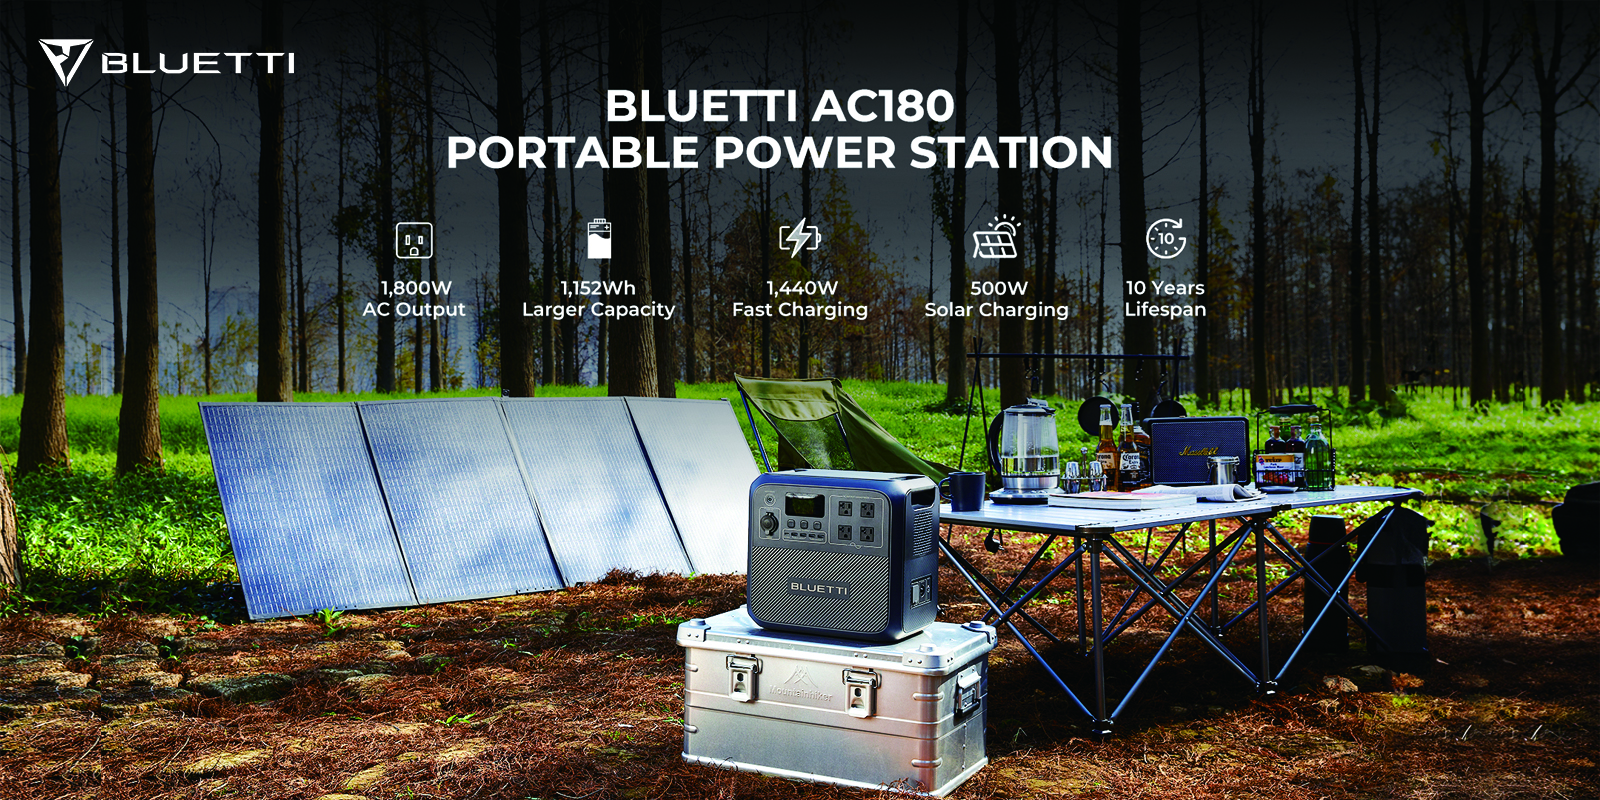 Features of the Bluetti AC180 portable power for RVing and camping